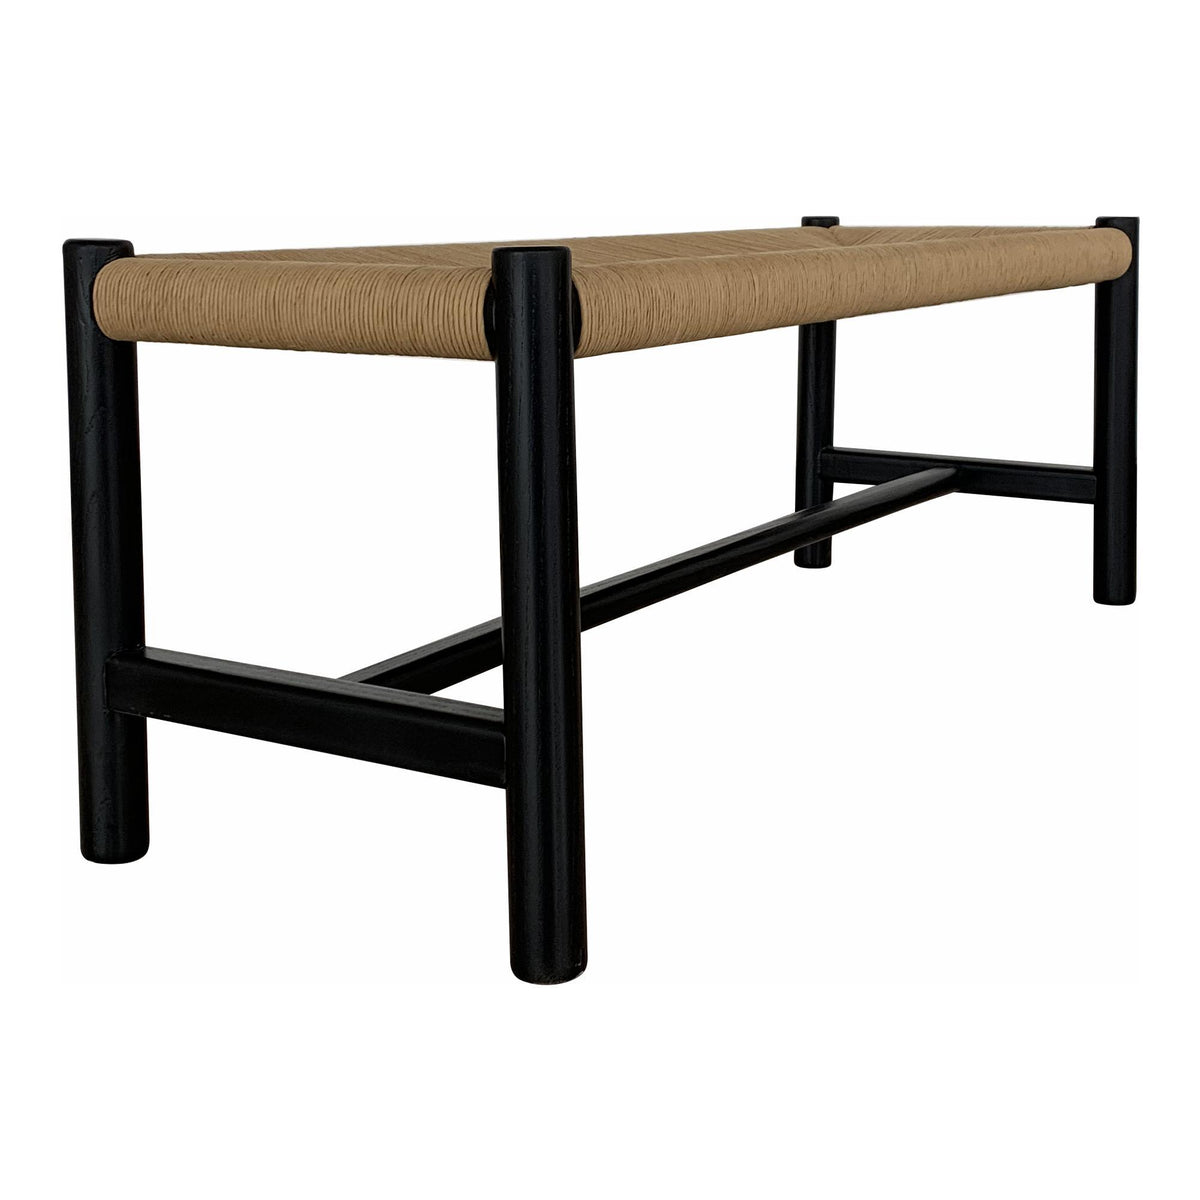 Moe's Home Collection Hawthorn Bench Small Black - FG-1027-02